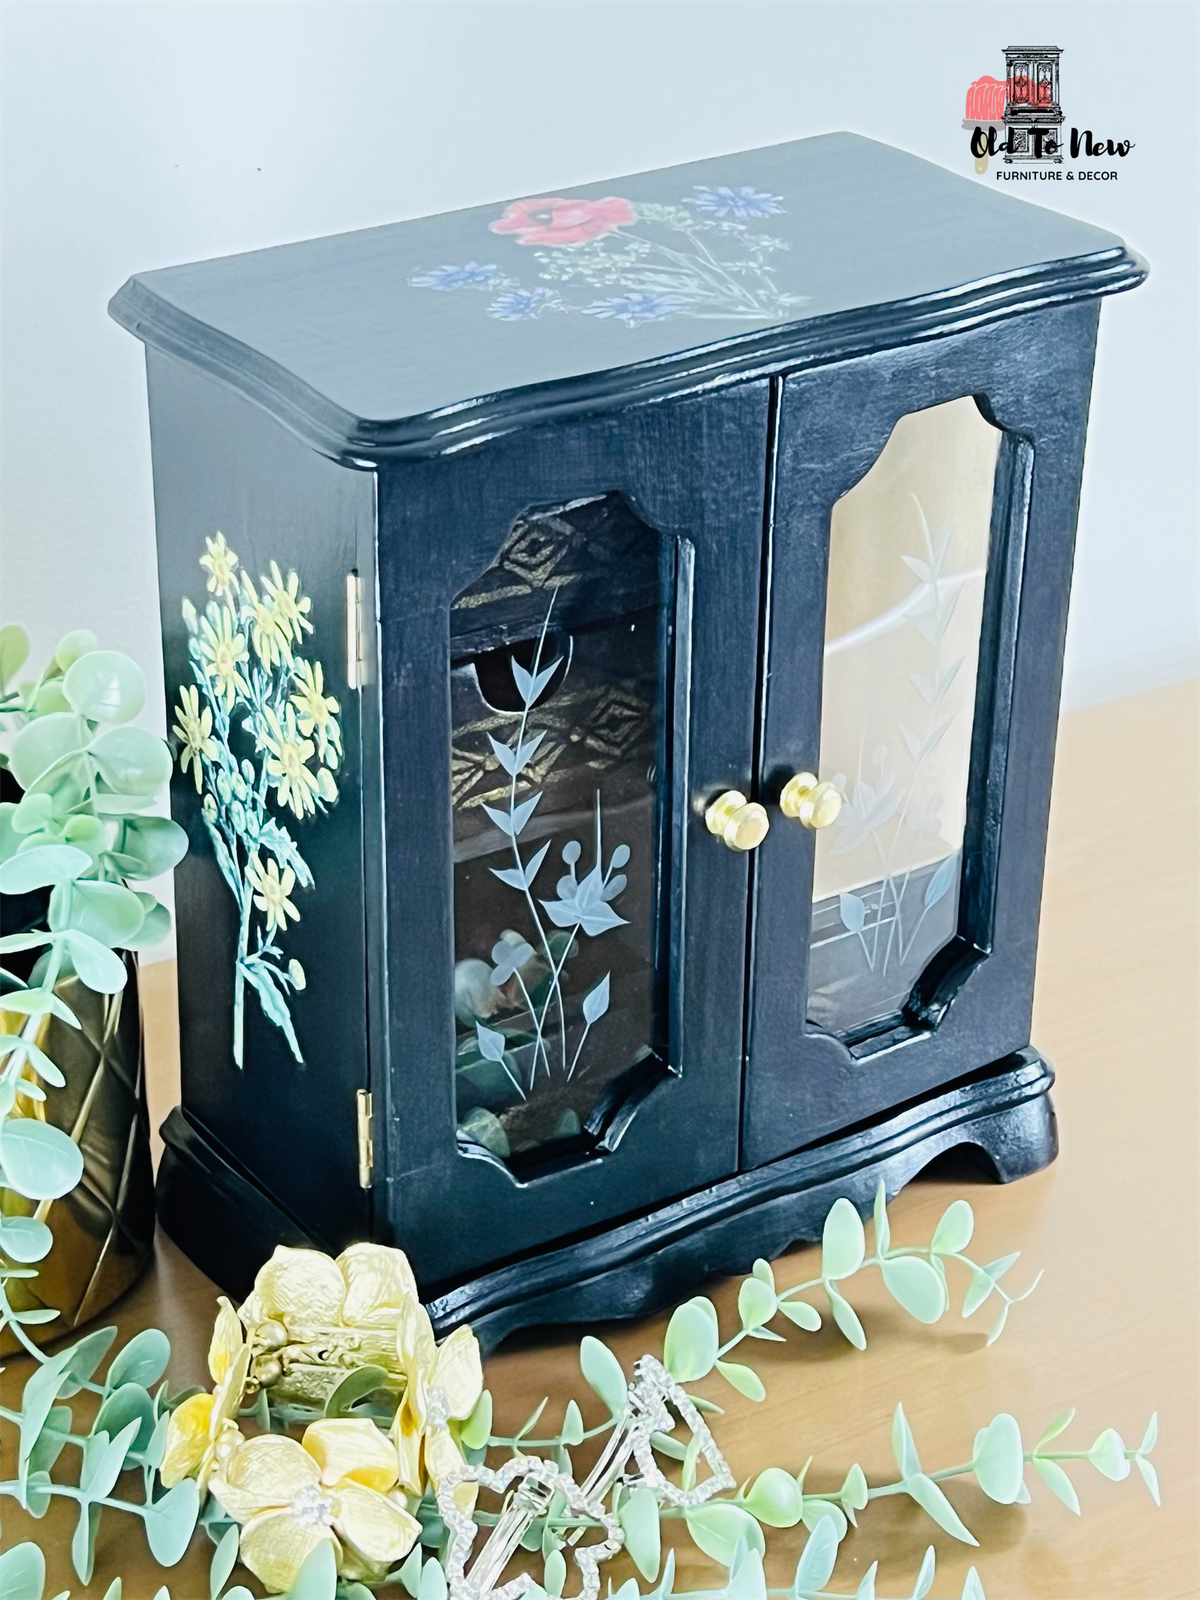 Black  Decorated Jewelry Box ; O(ld to New Furniture. Jewelry case for rings, earrings and necklace